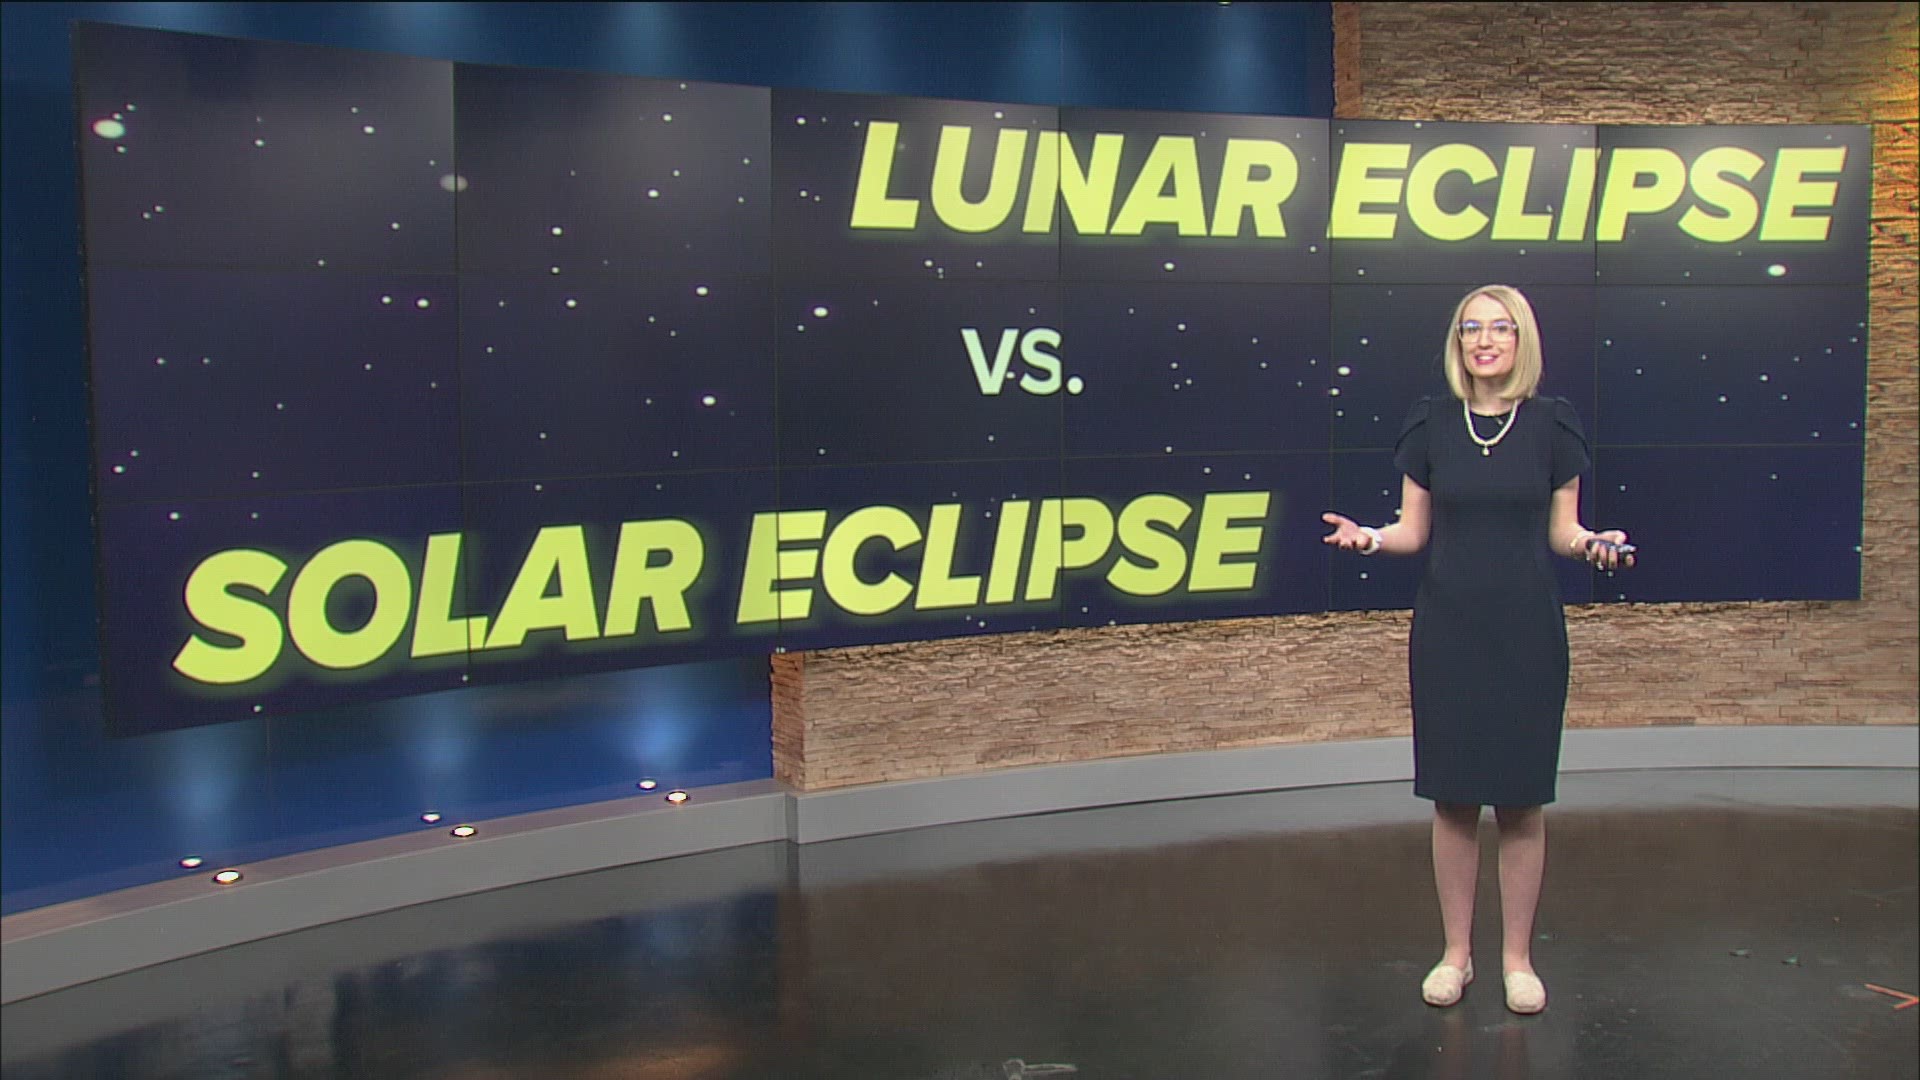 WTOL 11 Meteorologist Diane Phillips breaks down the differences between solar and lunar eclipses ahead of the April 8, 2024 total solar eclipse.